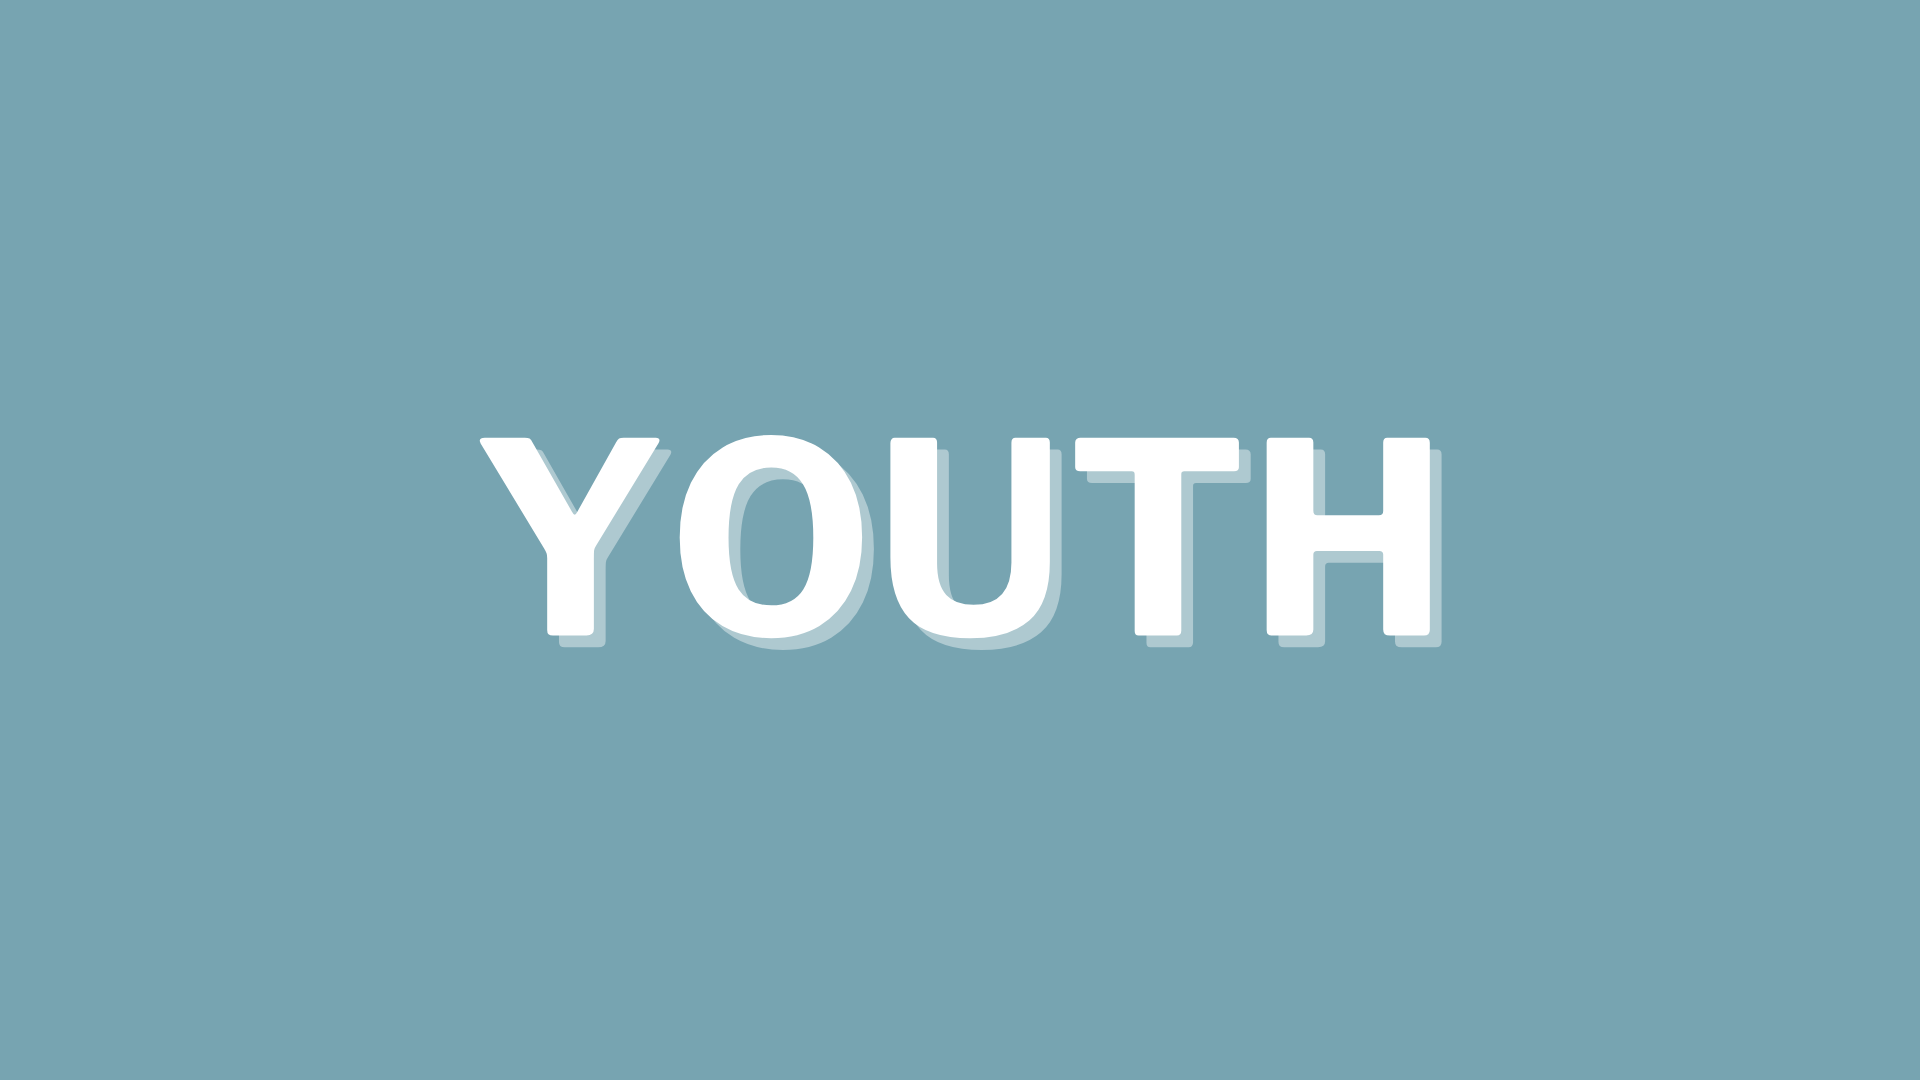 Youth (Copy)